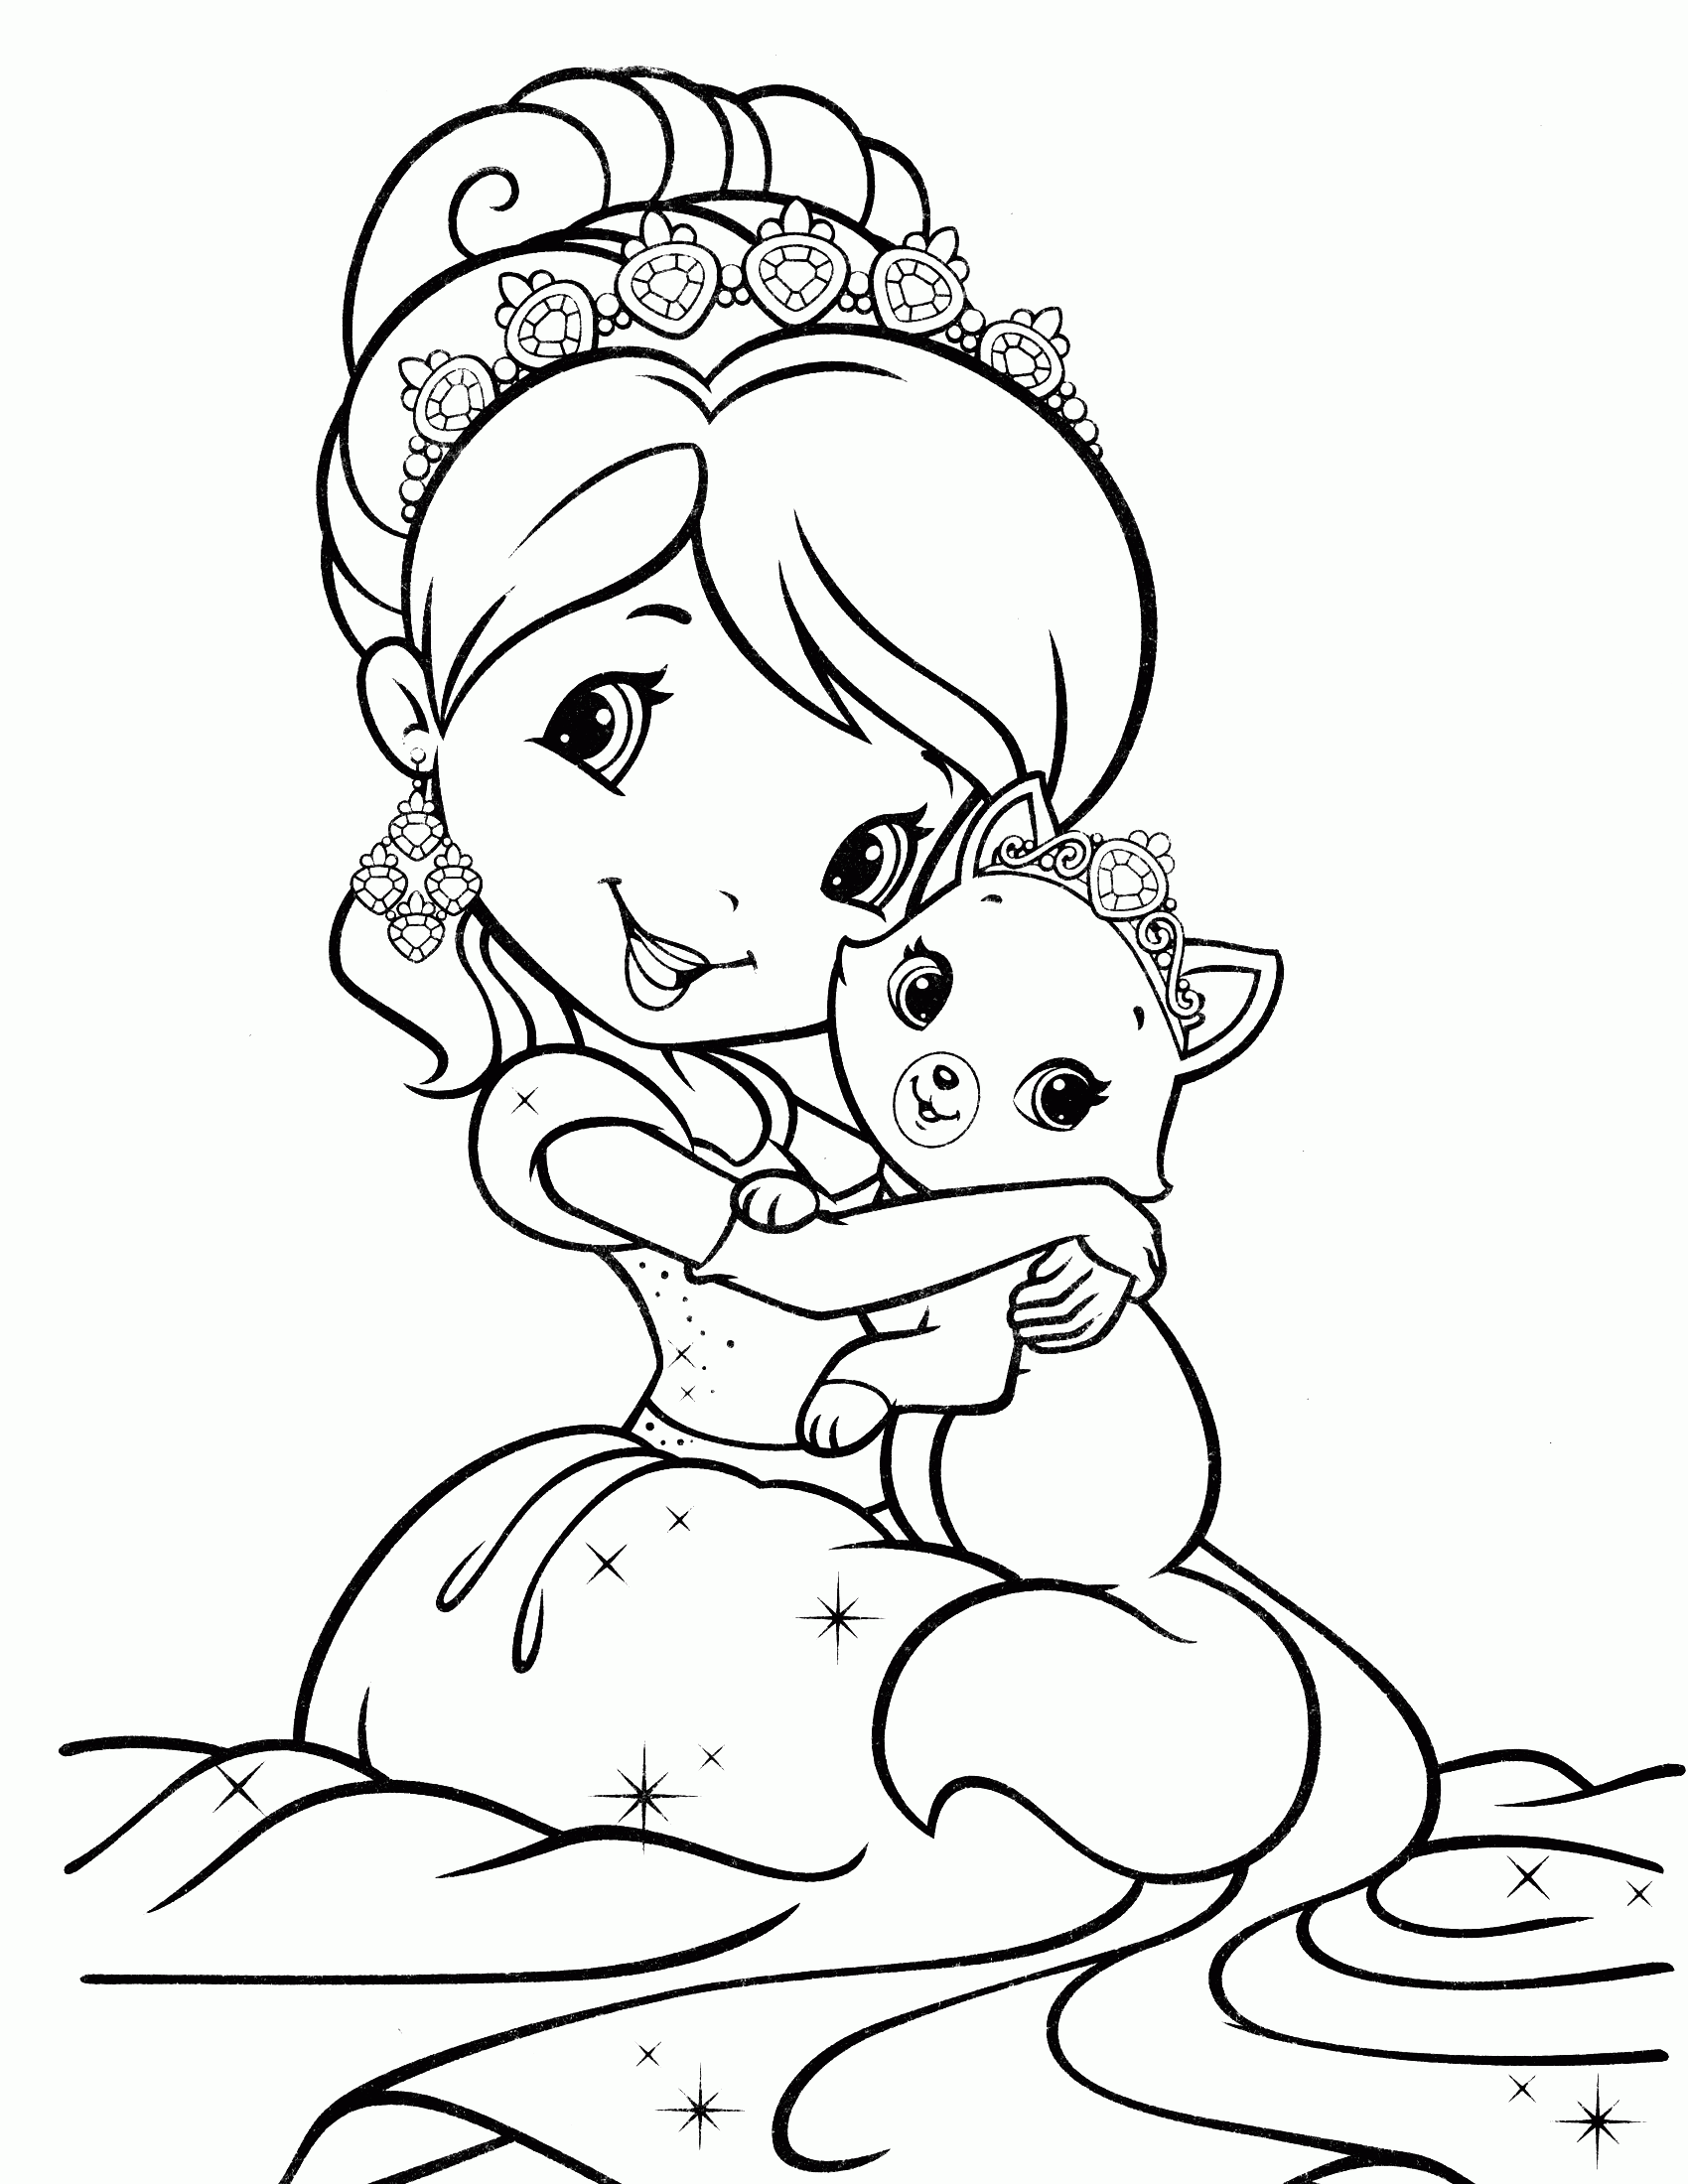 Coloring Pages Of Strawberry Short Cake - Coloring Home